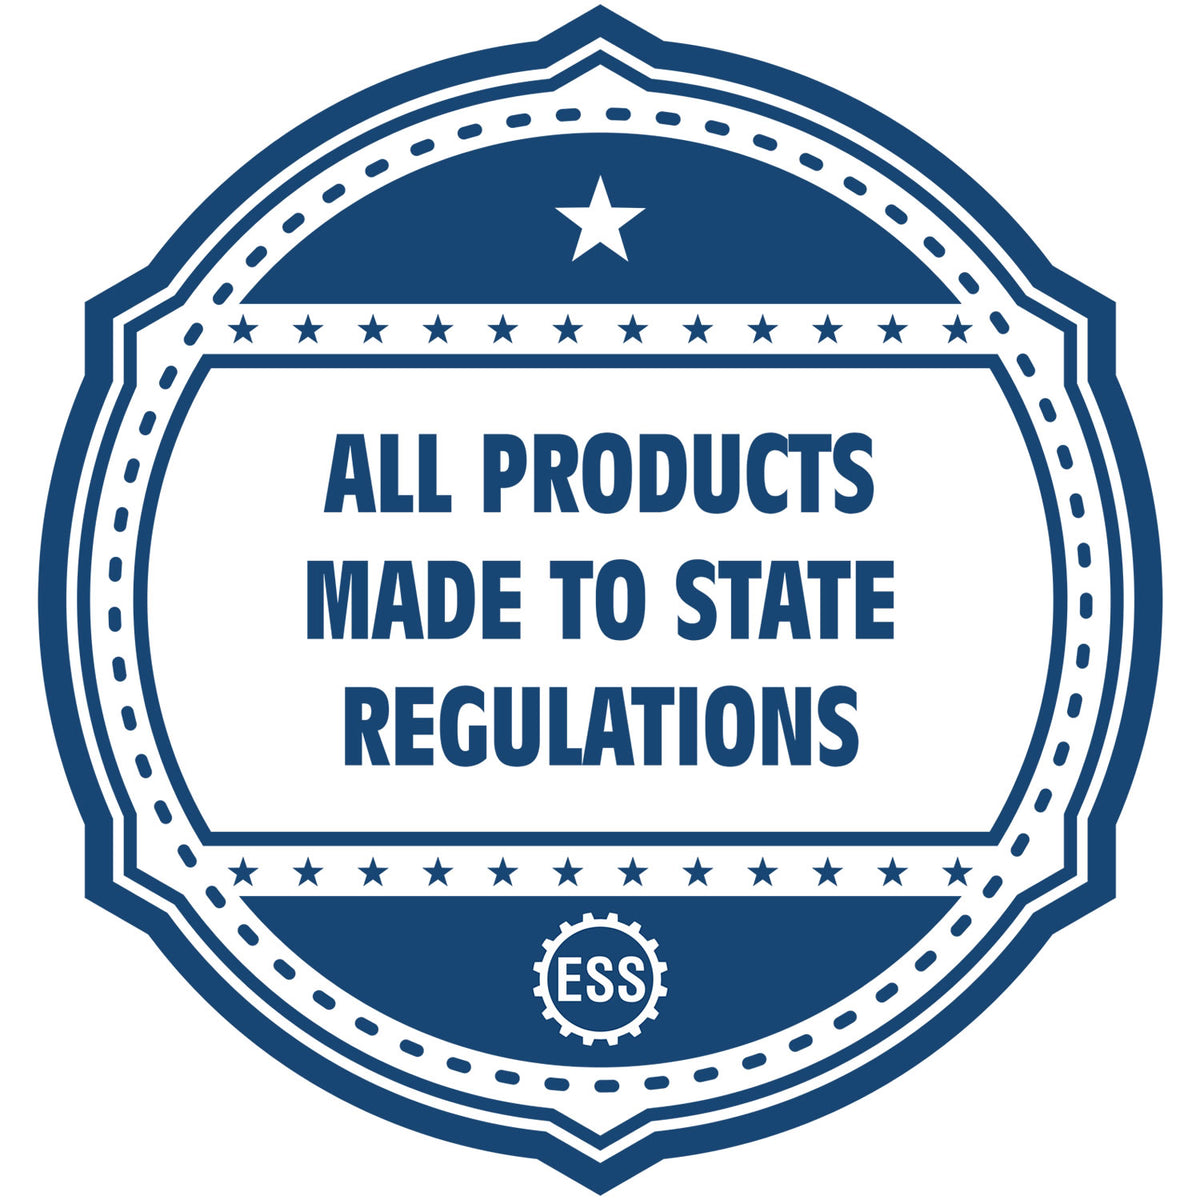 An icon or badge element for the Slim Pre-Inked Louisiana Architect Seal Stamp showing that this product is made in compliance with state regulations.